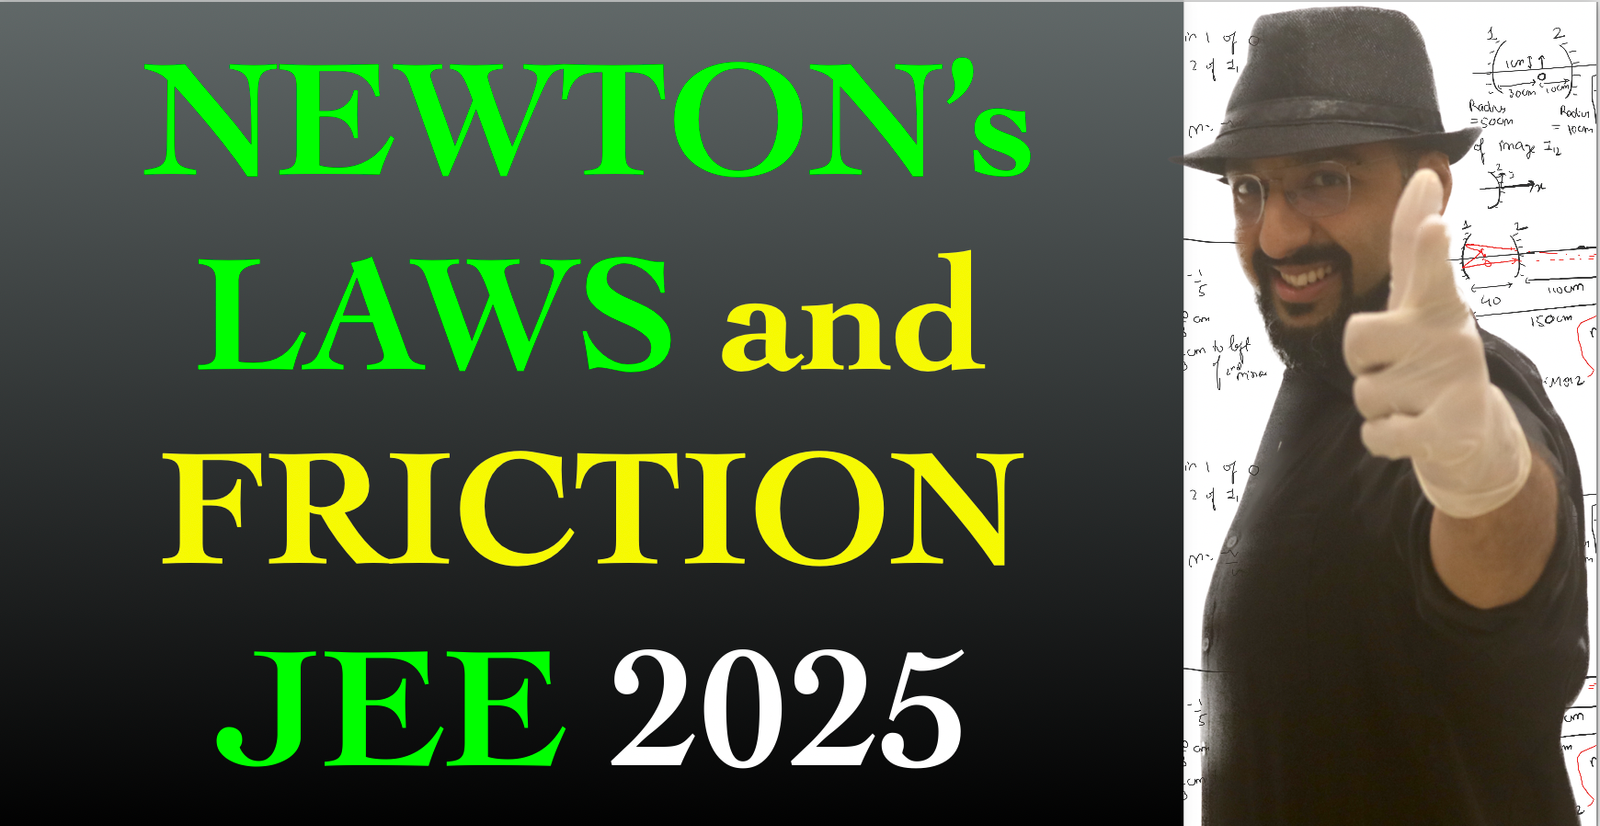 Newton’s Laws and Friction